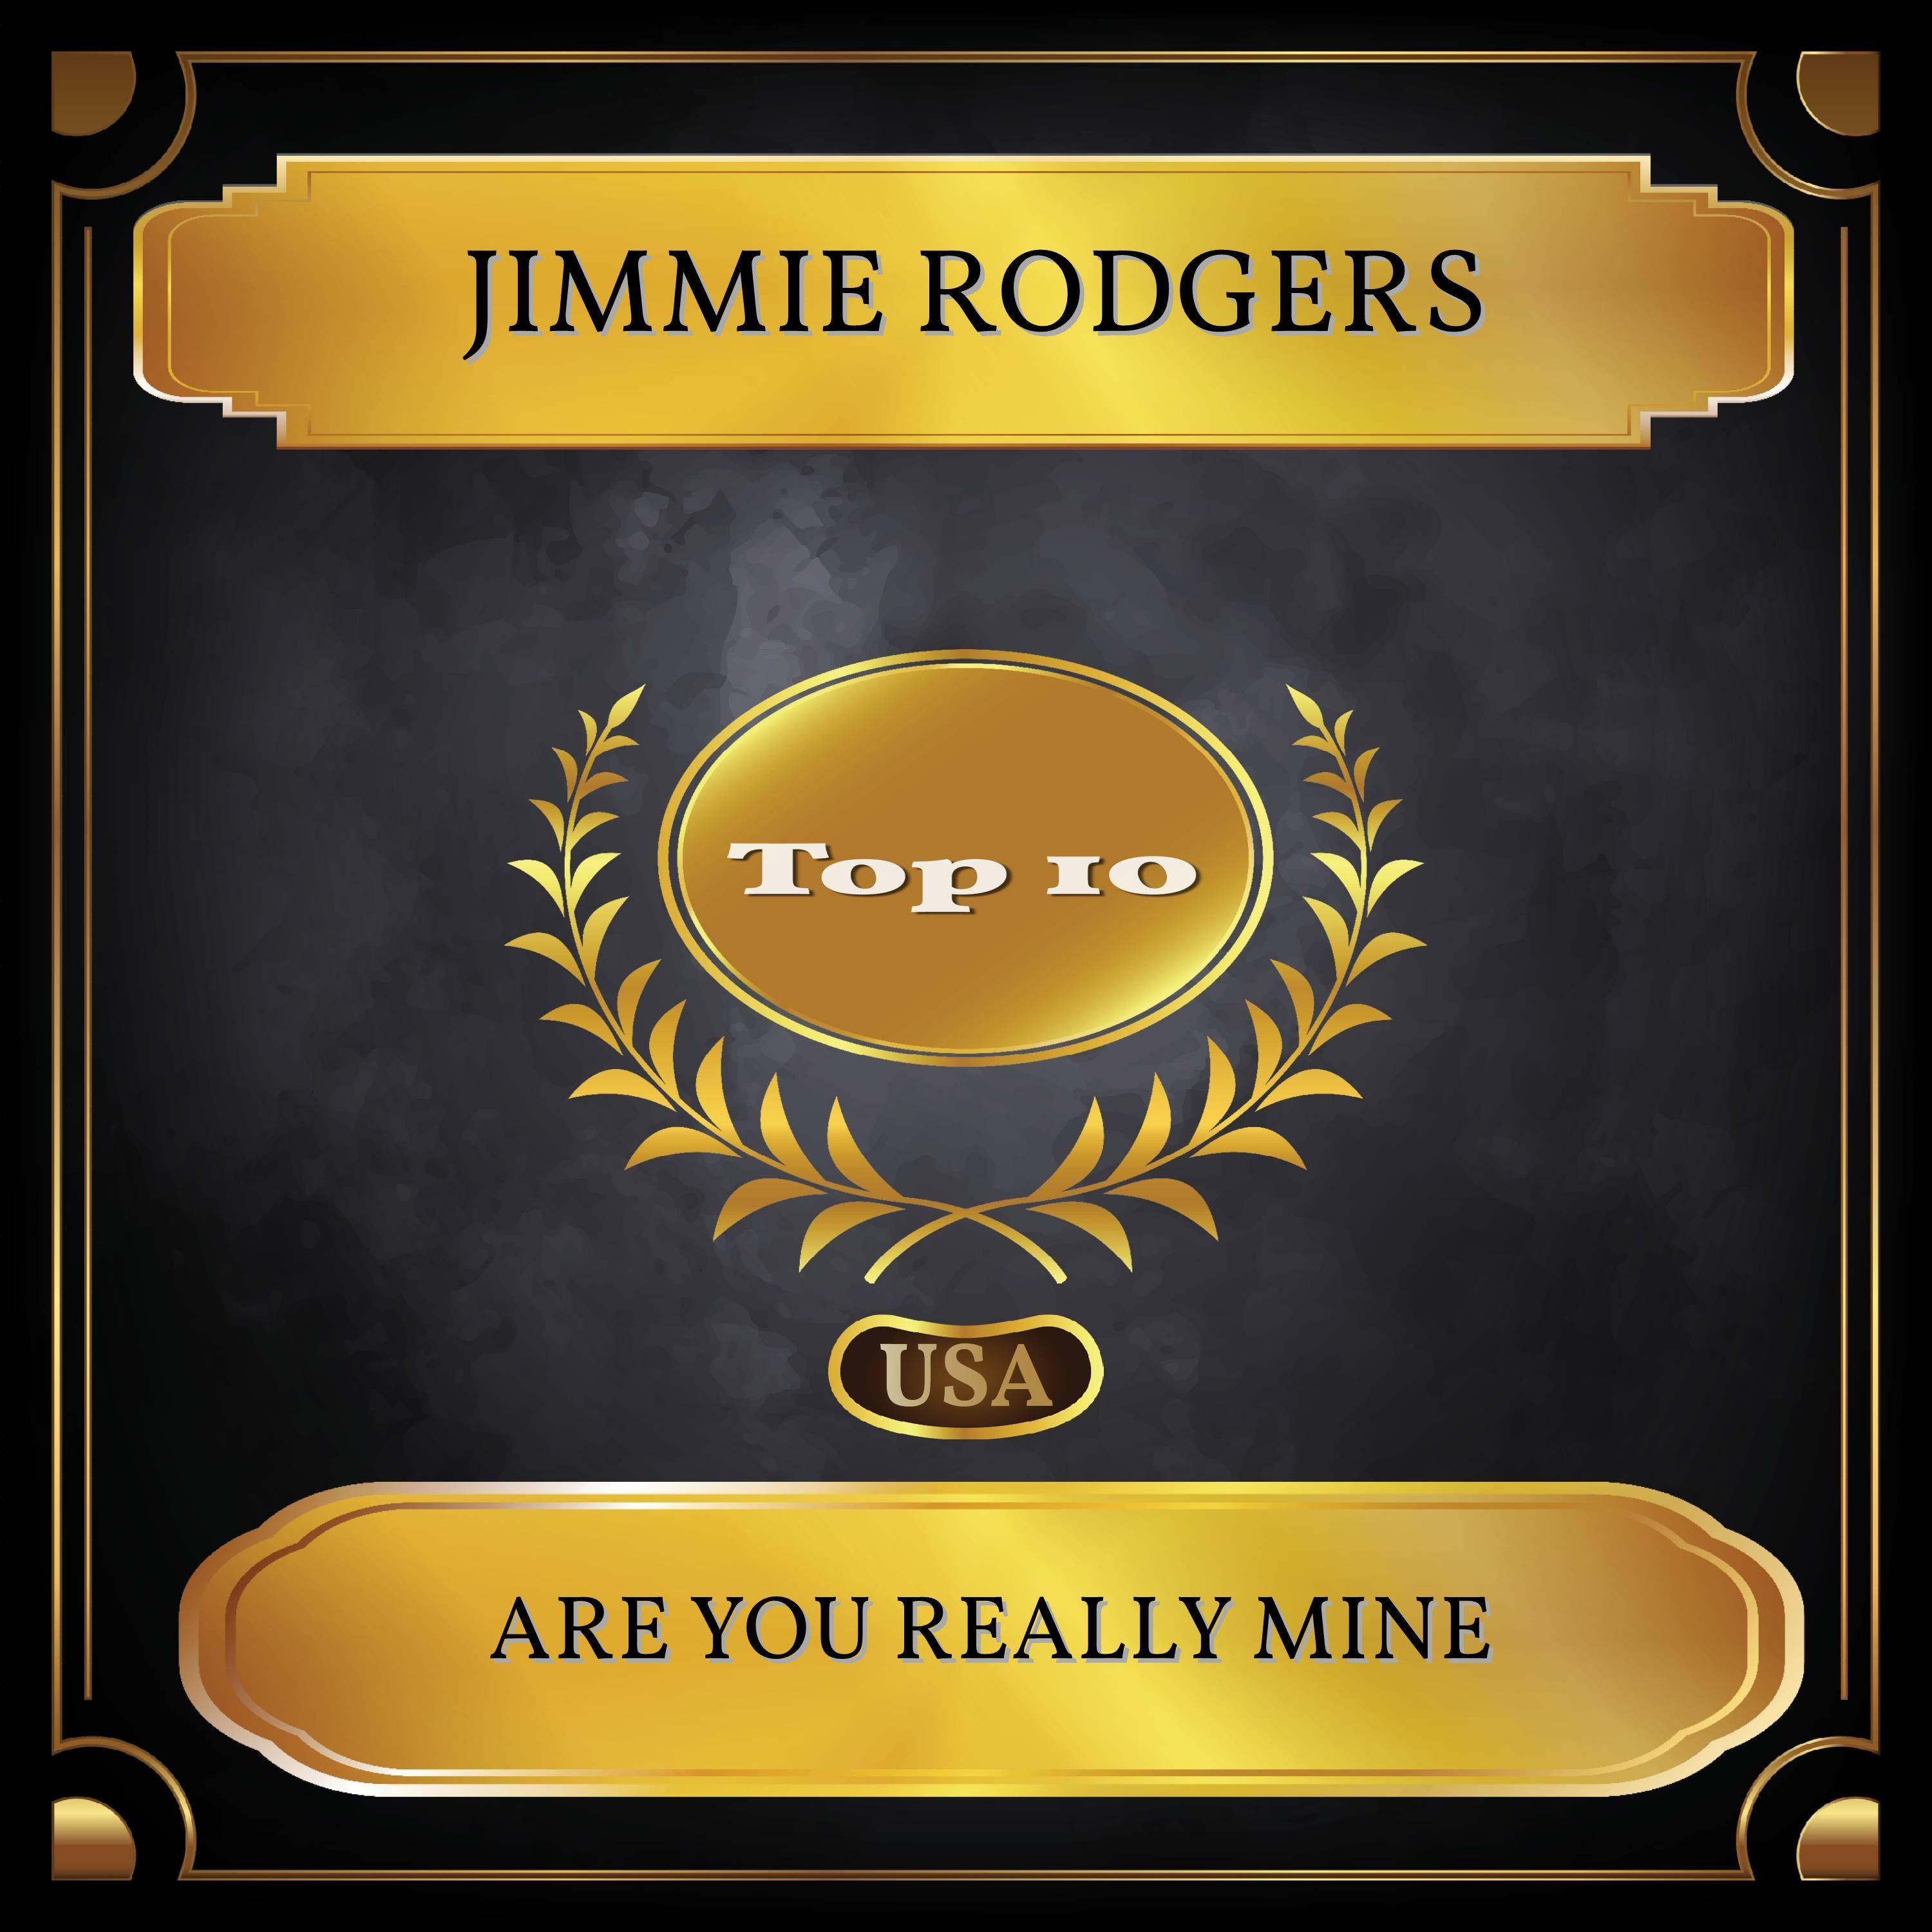 Are You Really Mine (Billboard Hot 100 - No. 10)